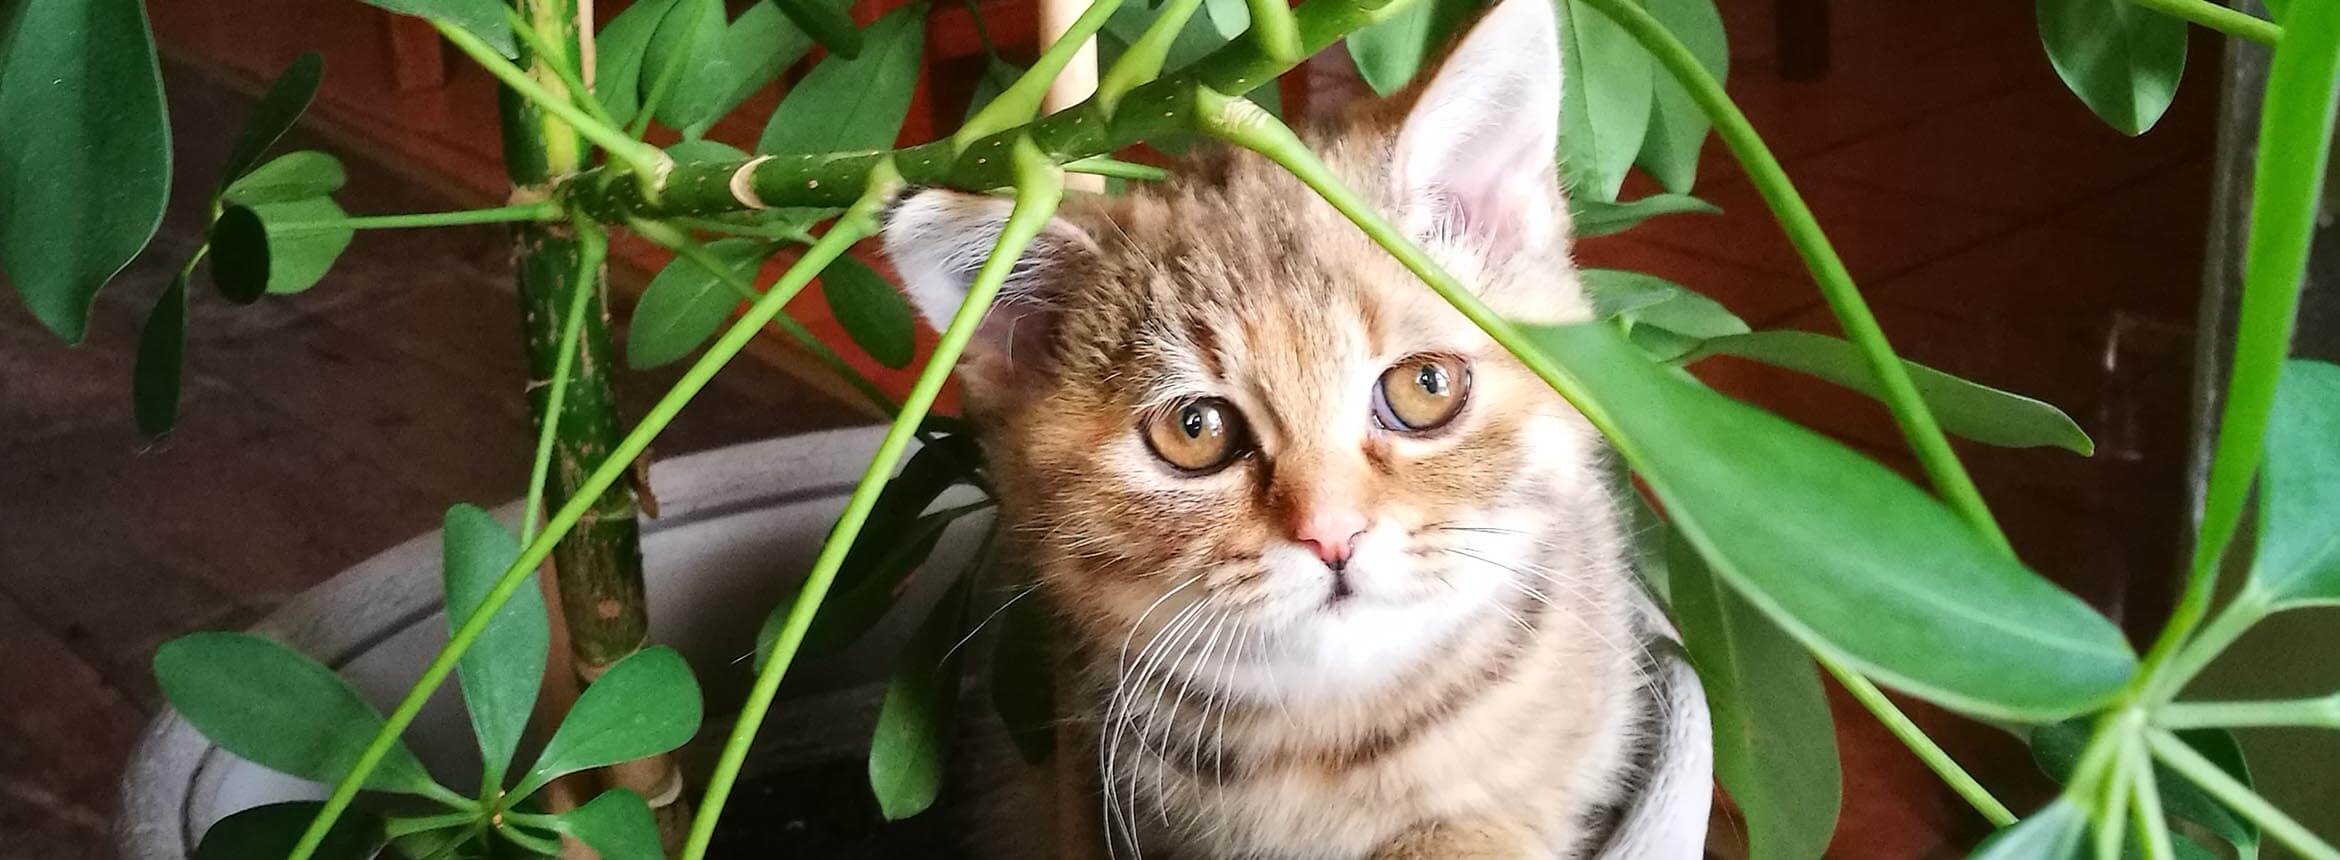 image of cat in potted plant